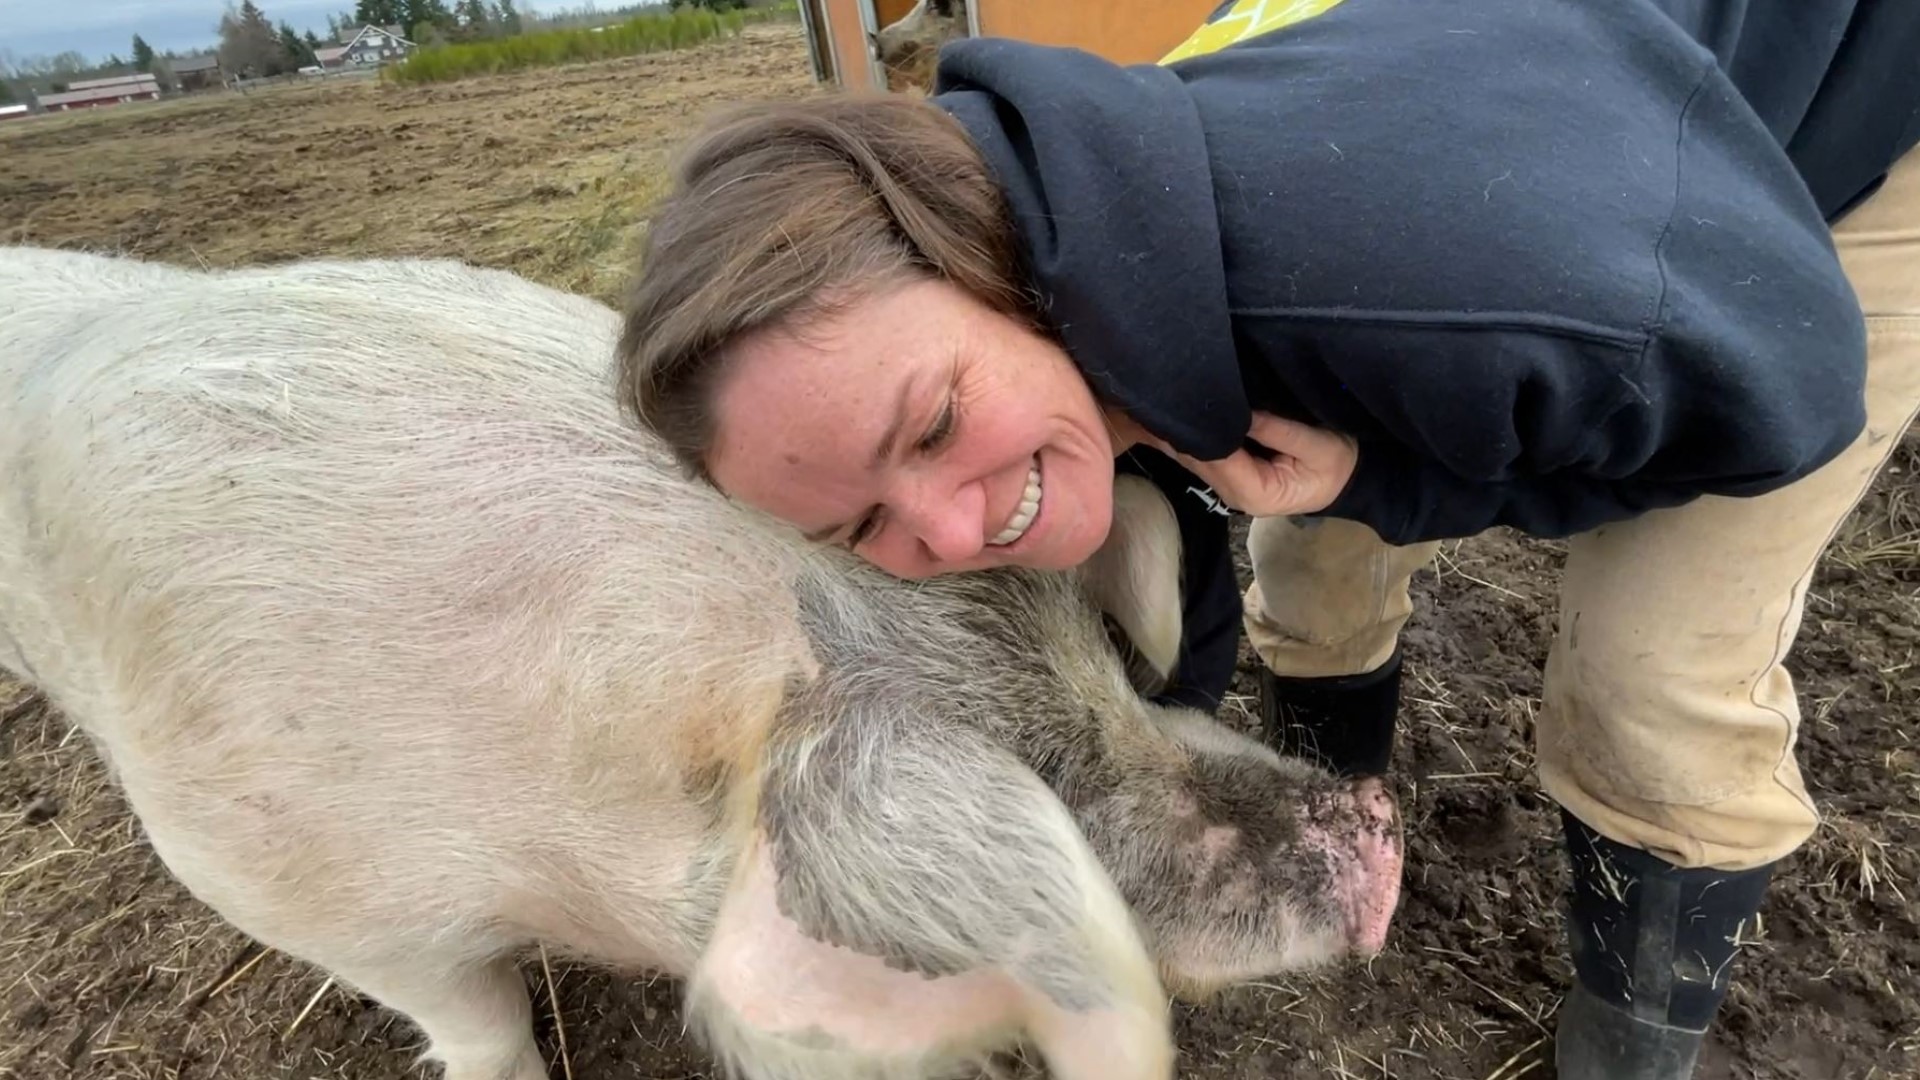 The 45 acre farm specializes in pigs deserving a better life. #k5evening